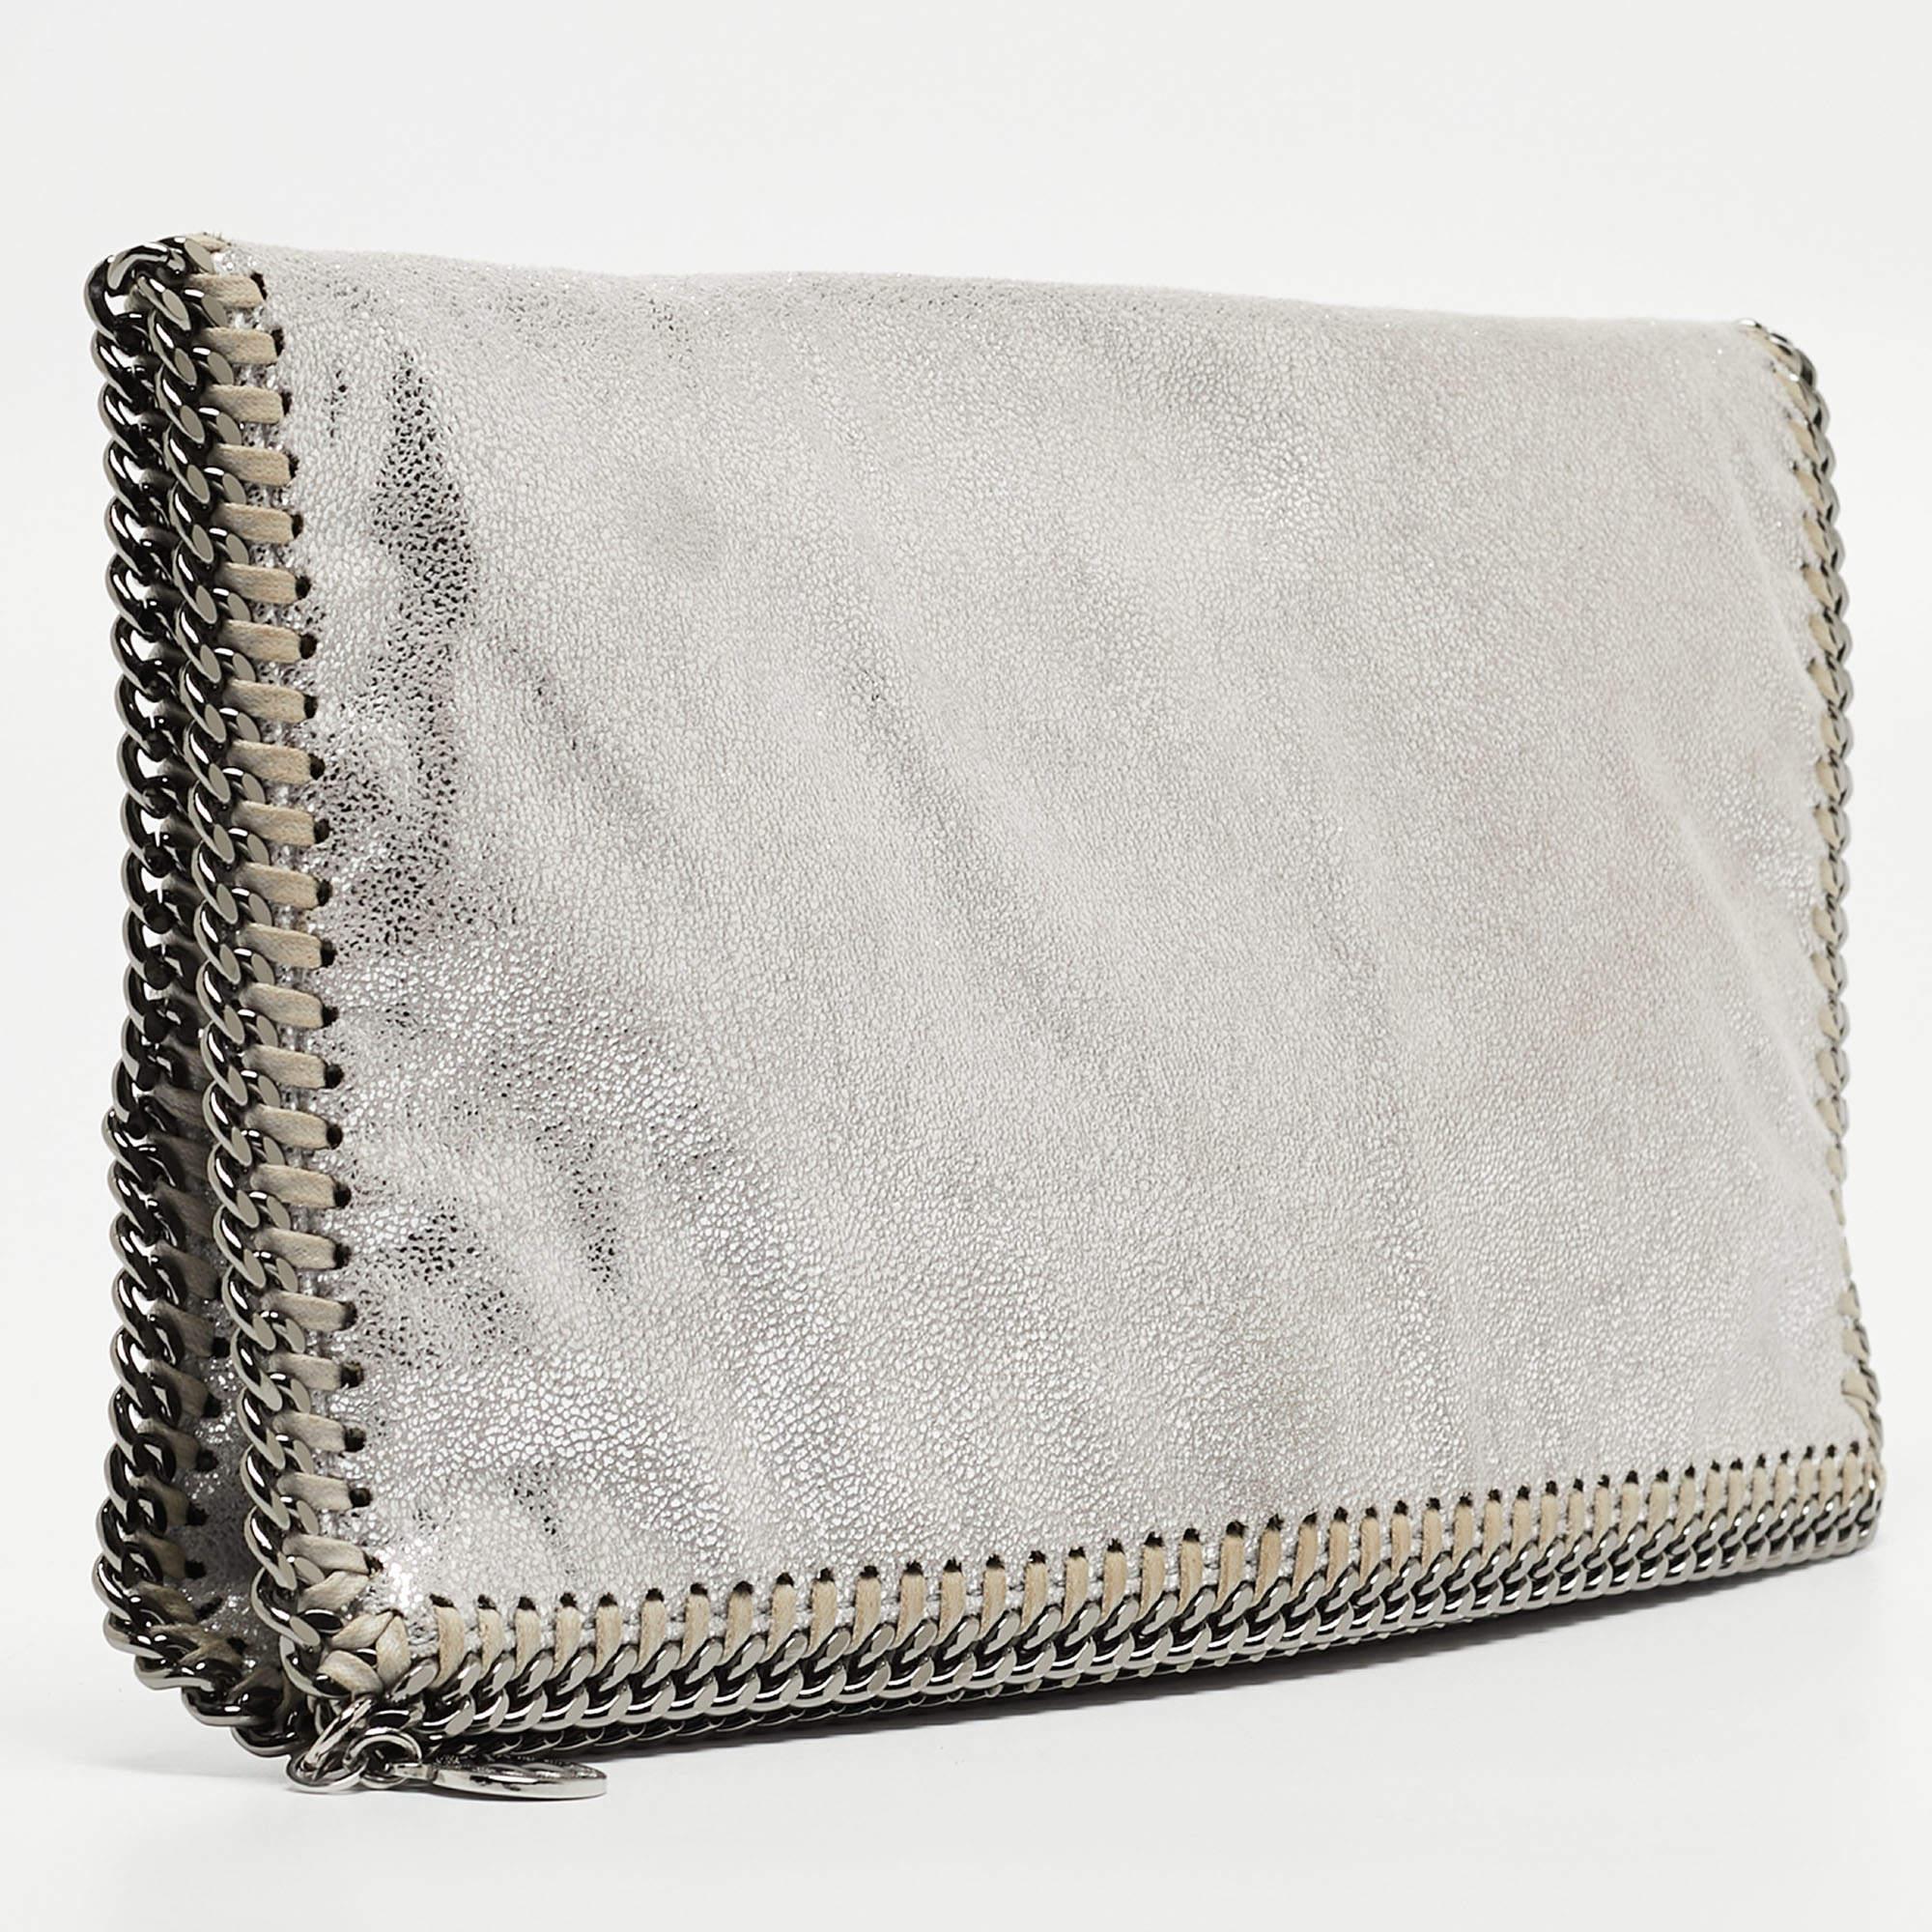 Crafted from quality materials, your wardrobe is missing out on this beautifully made designer clutch. Look your fashionable best in any outfit with this stylish clutch that promises to elevate your ensemble.

